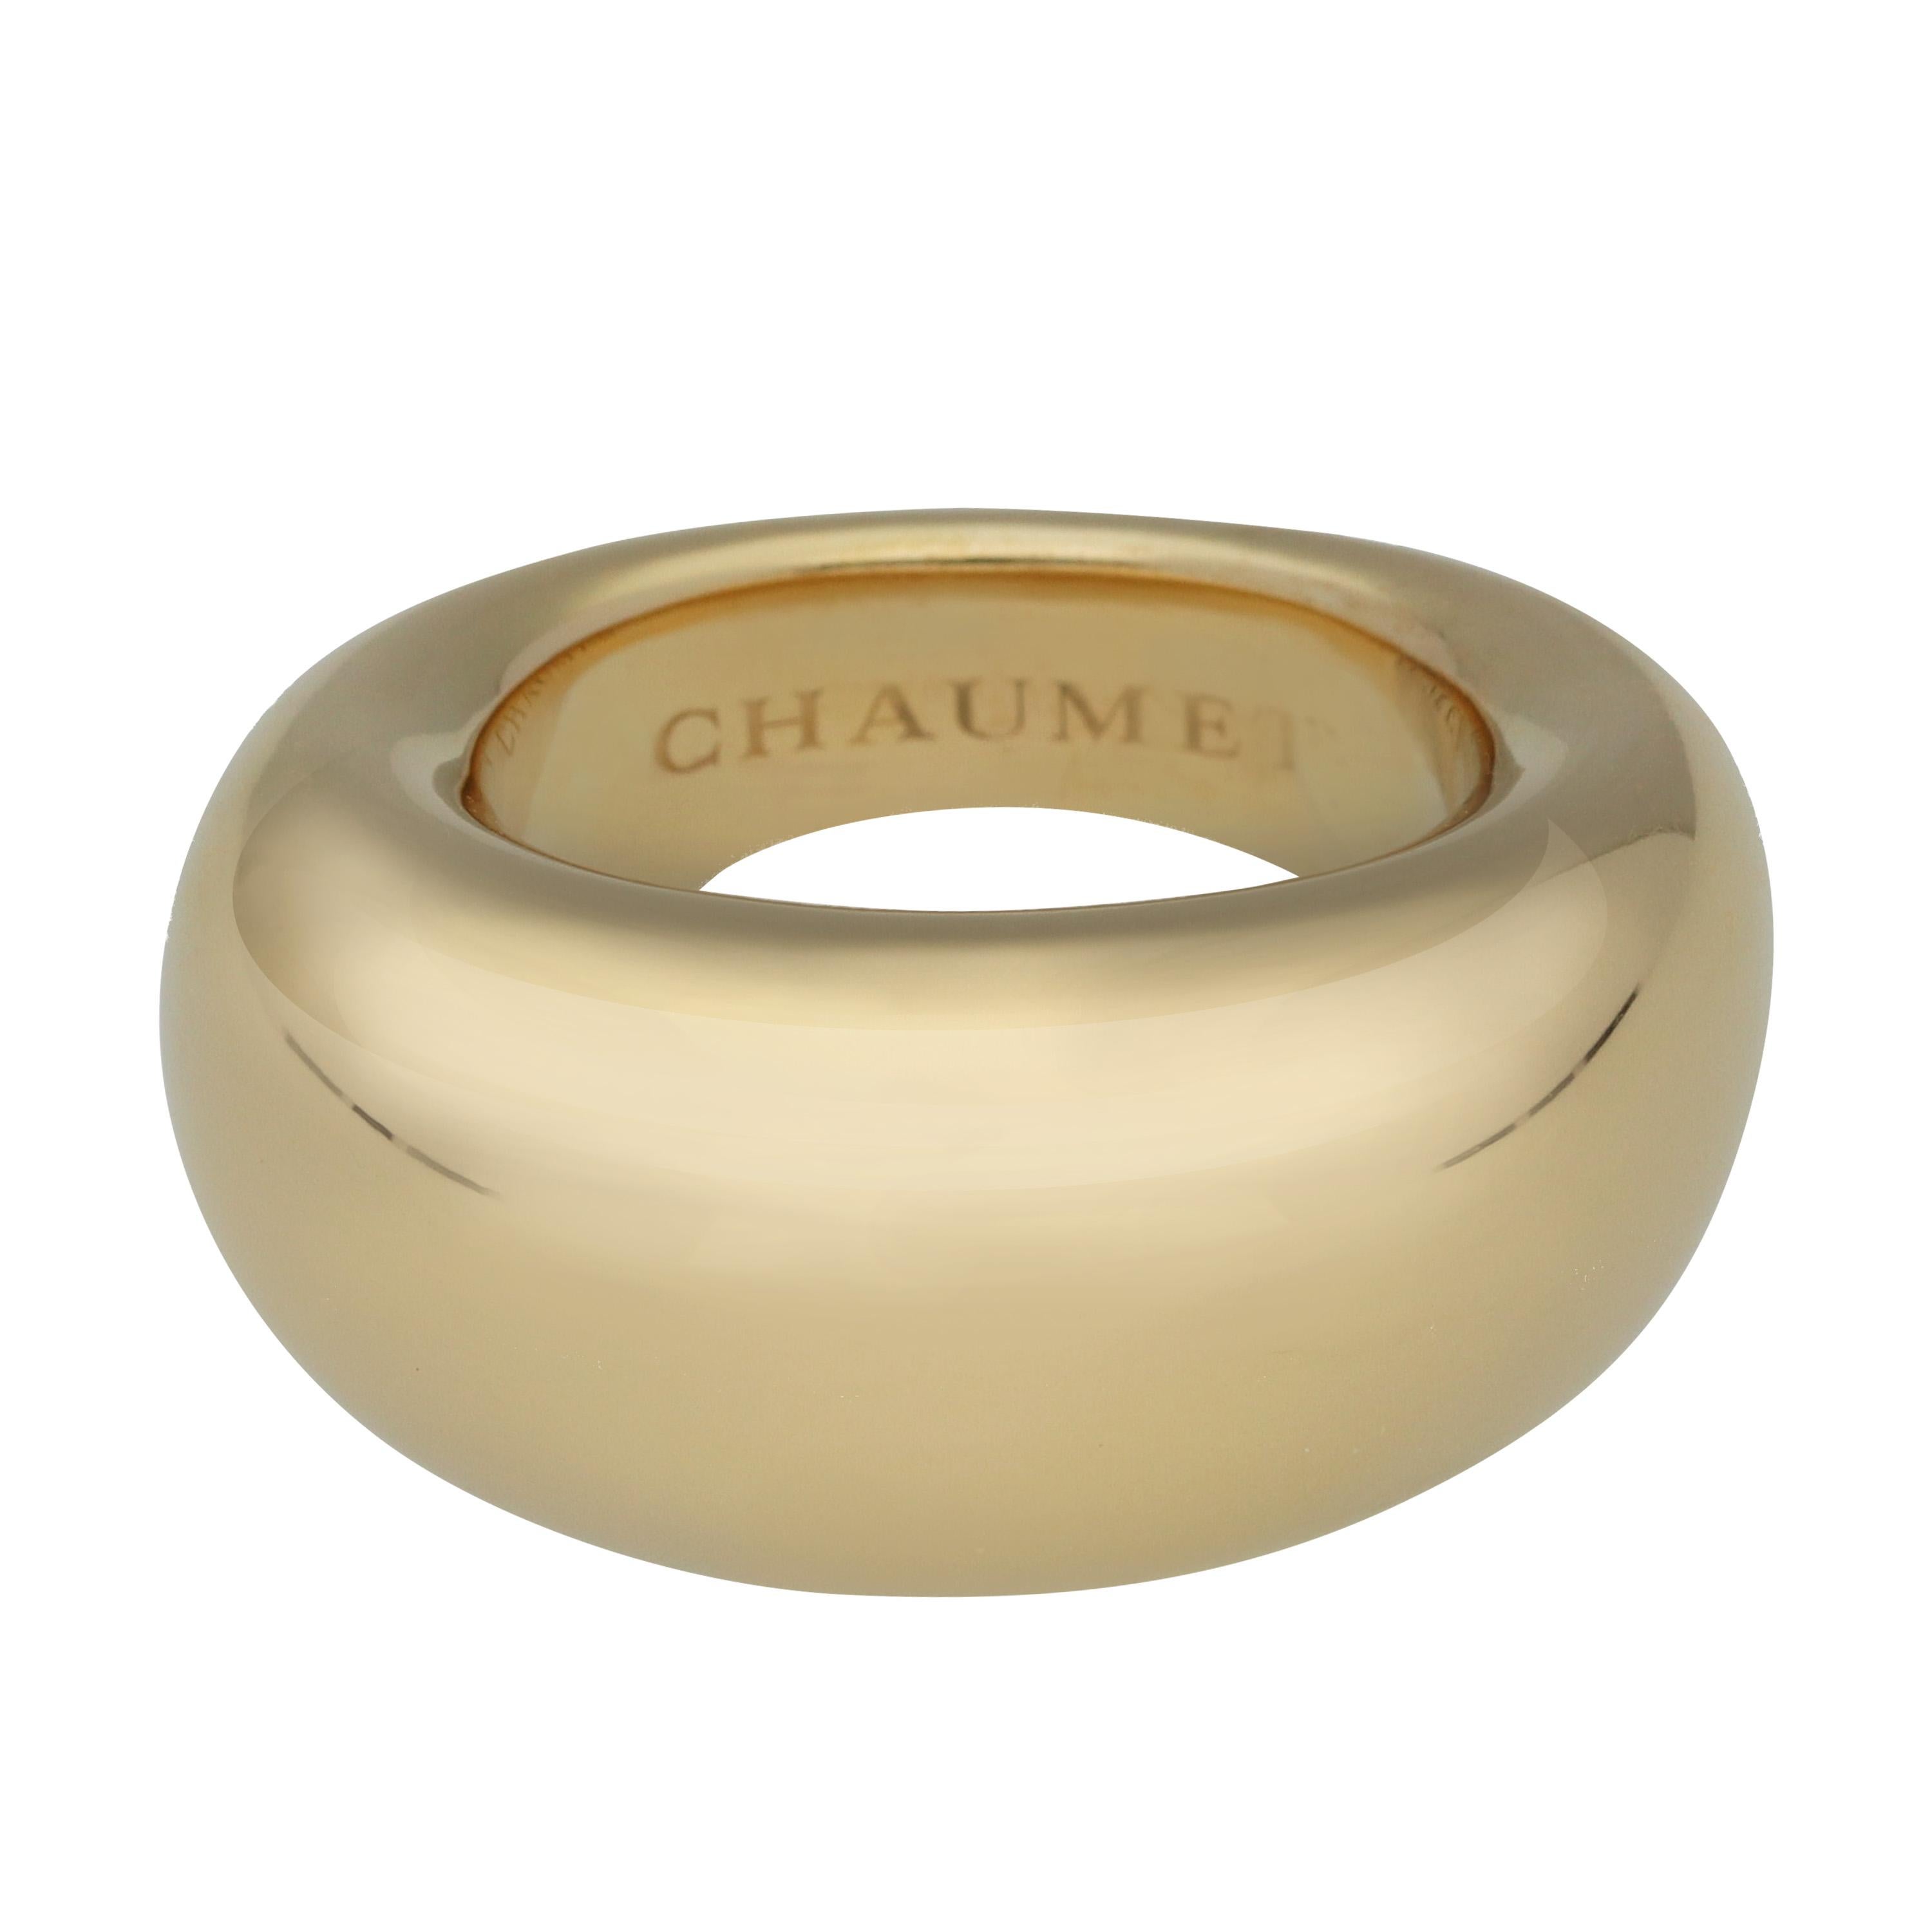 Contemporary Chaumet 'Anneau' Ring in Yellow Gold